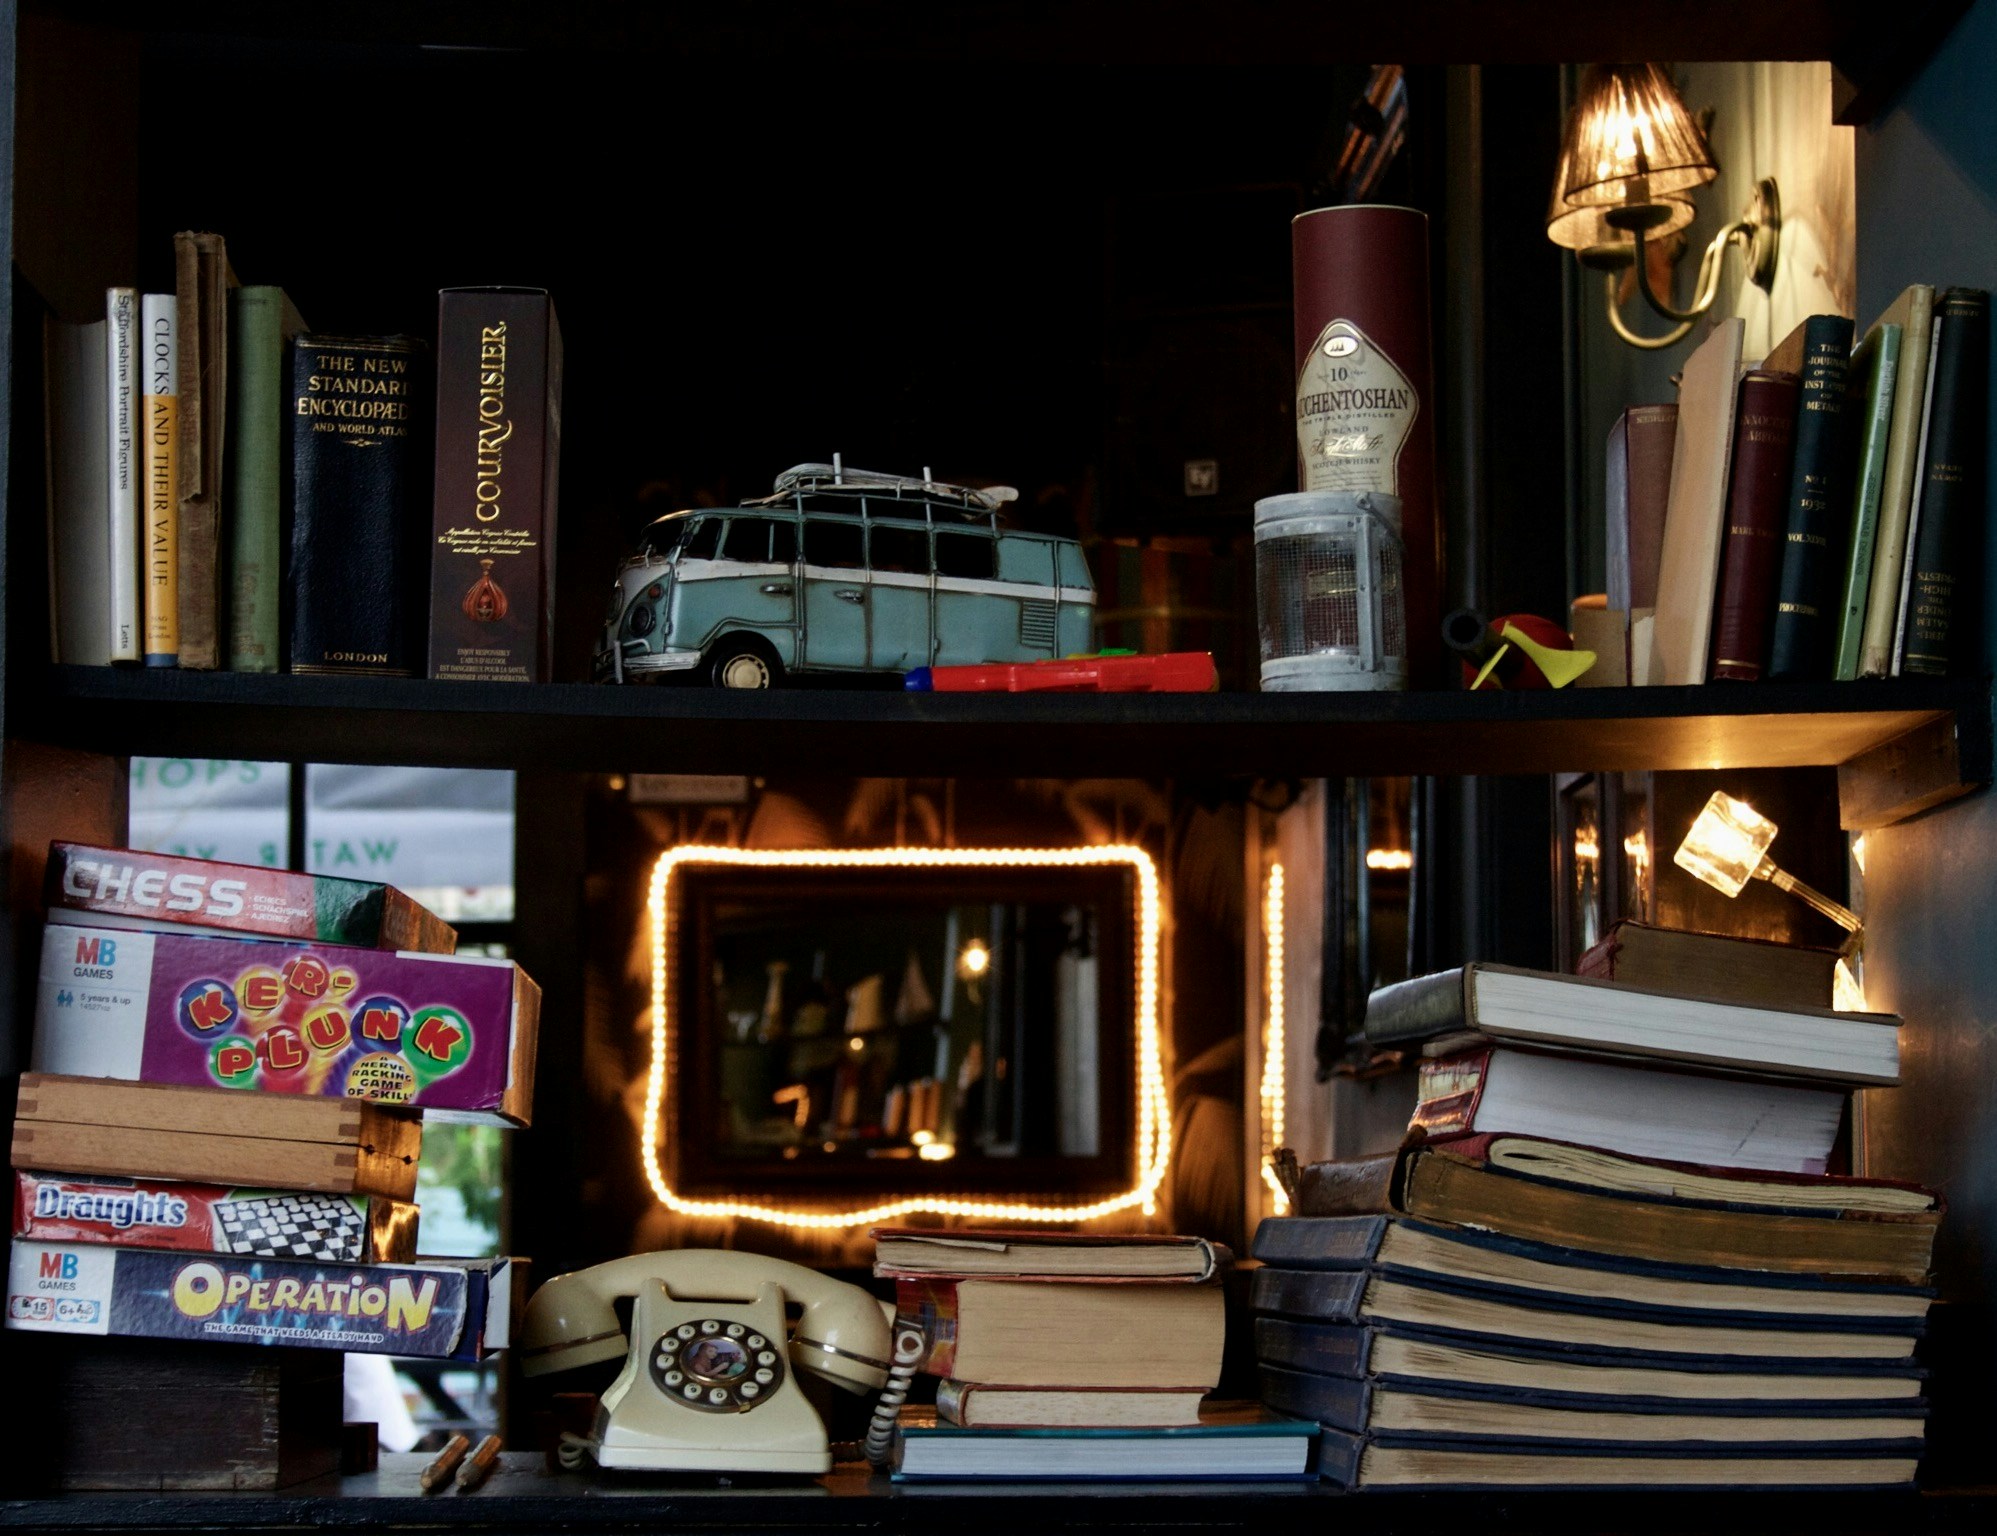 a book shelf filled with assorted books and a clock